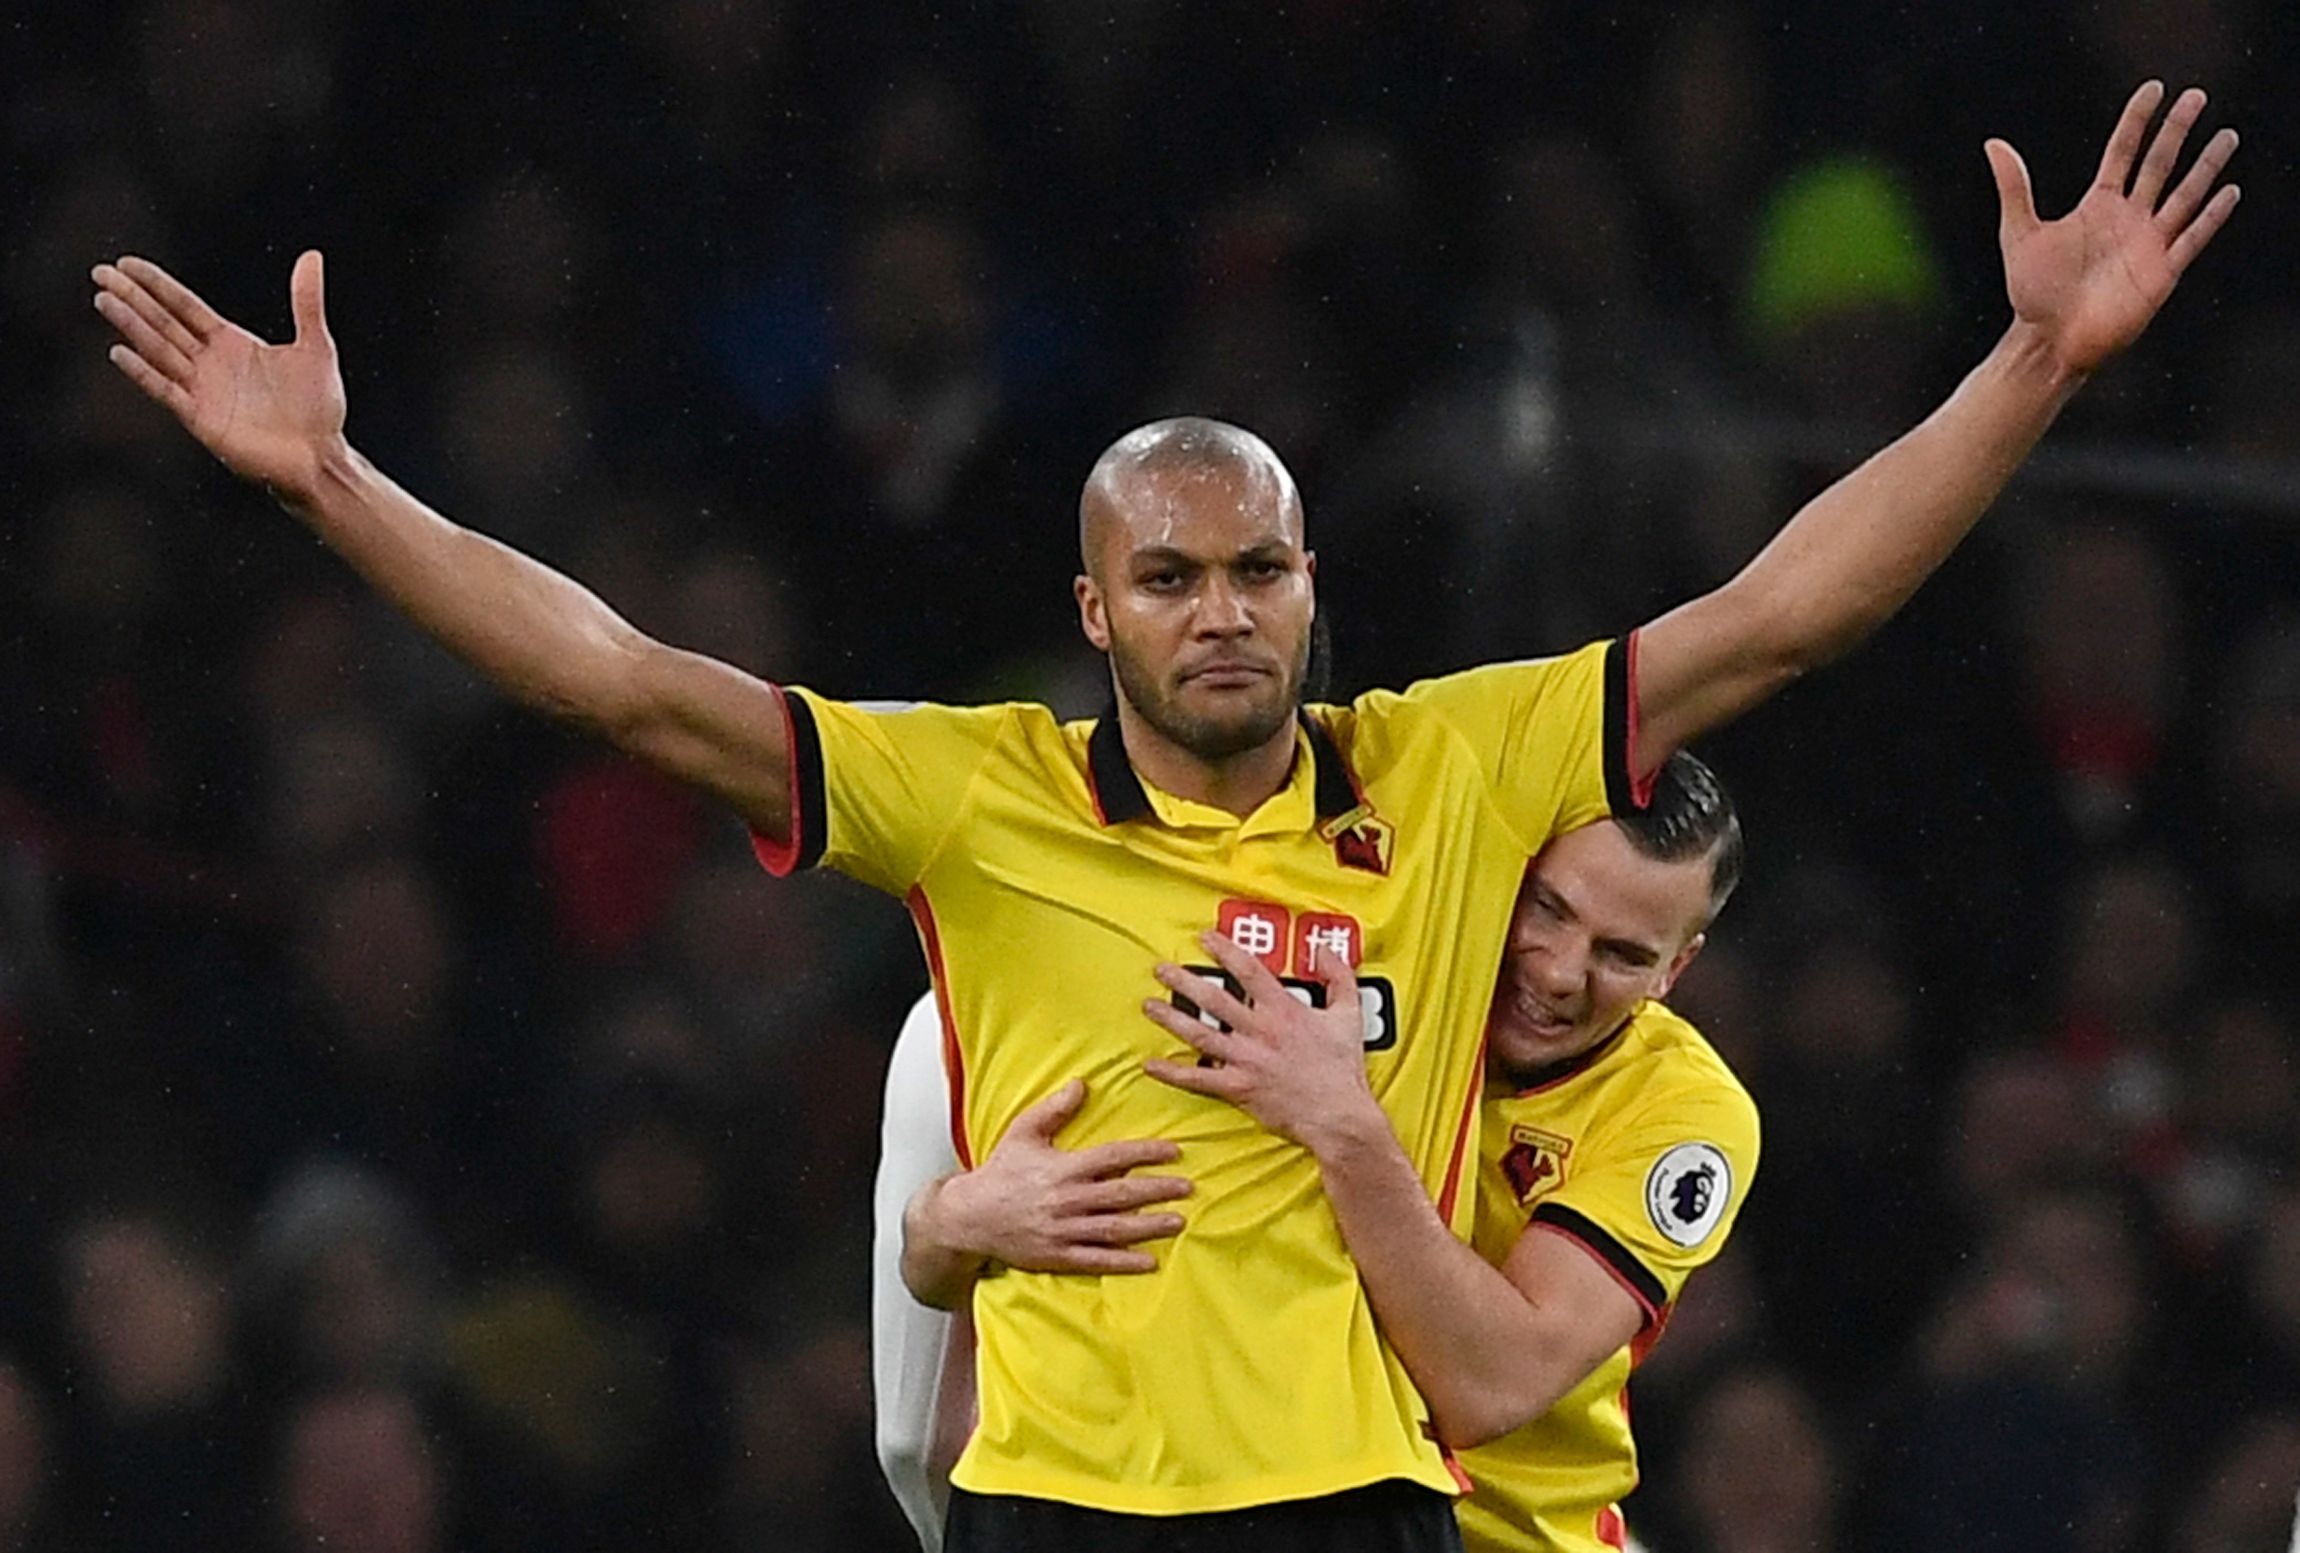 Britain Football Soccer - Arsenal v Watford - Premier League - Emirates Stadium - 31/1/17 Watford's Younes Kaboul celebrates scoring their first goal with Tom Cleverley  Reuters / Dylan Martinez Livepic EDITORIAL USE ONLY. No use with unauthorized audio, video, data, fixture lists, club/league logos or "live" services. Online in-match use limited to 45 images, no video emulation. No use in betting, games or single club/league/player publications.  Please contact your account representative for f